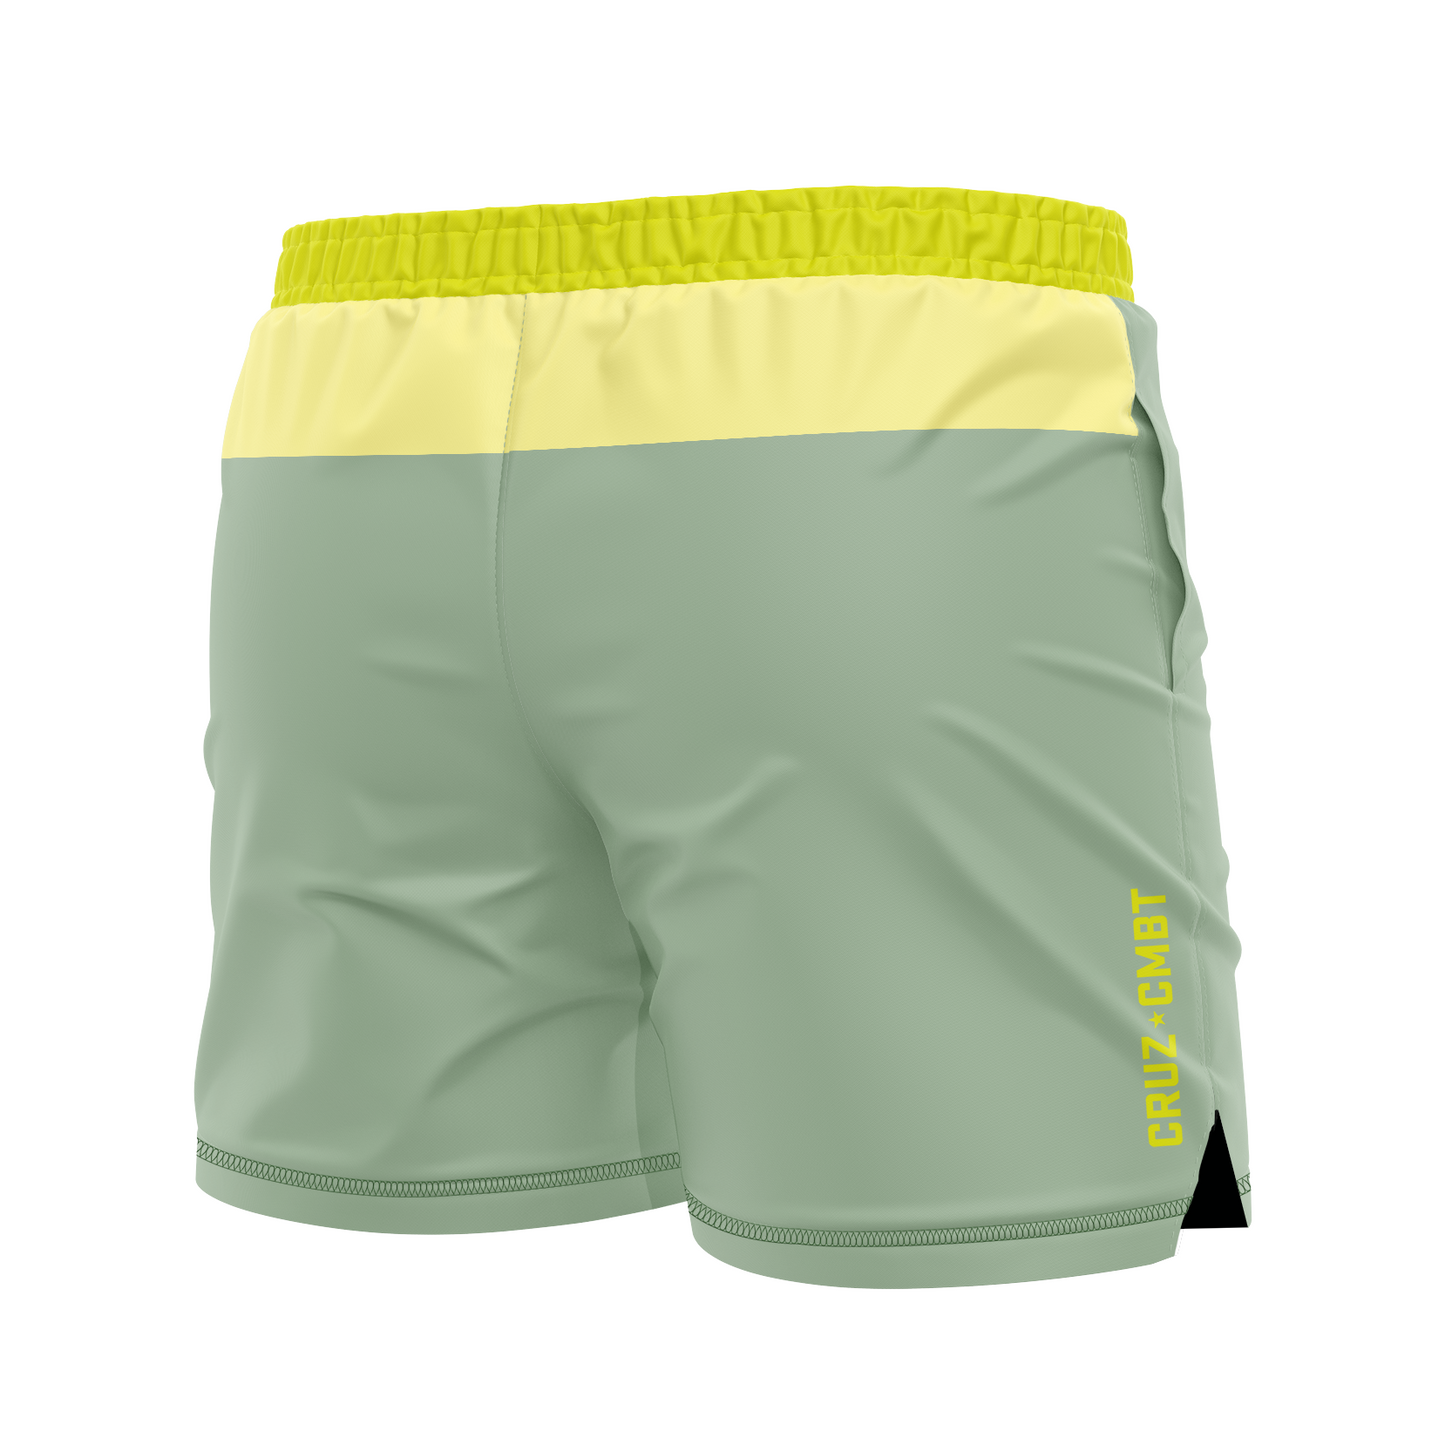 Base Collection men's FC shorts, sage/yellow/lime